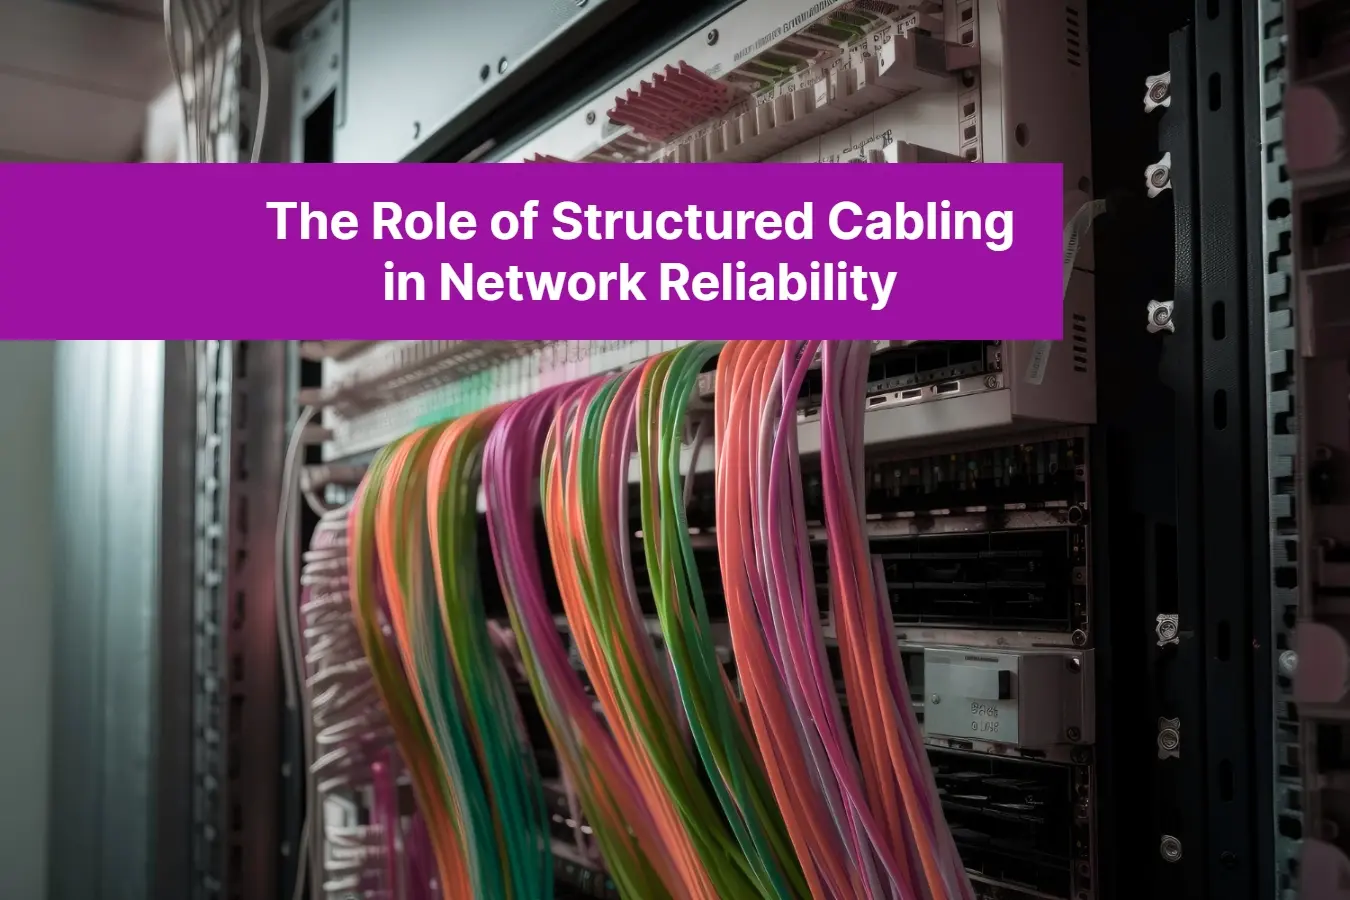 The Role of Structured Cabling in Network Reliability